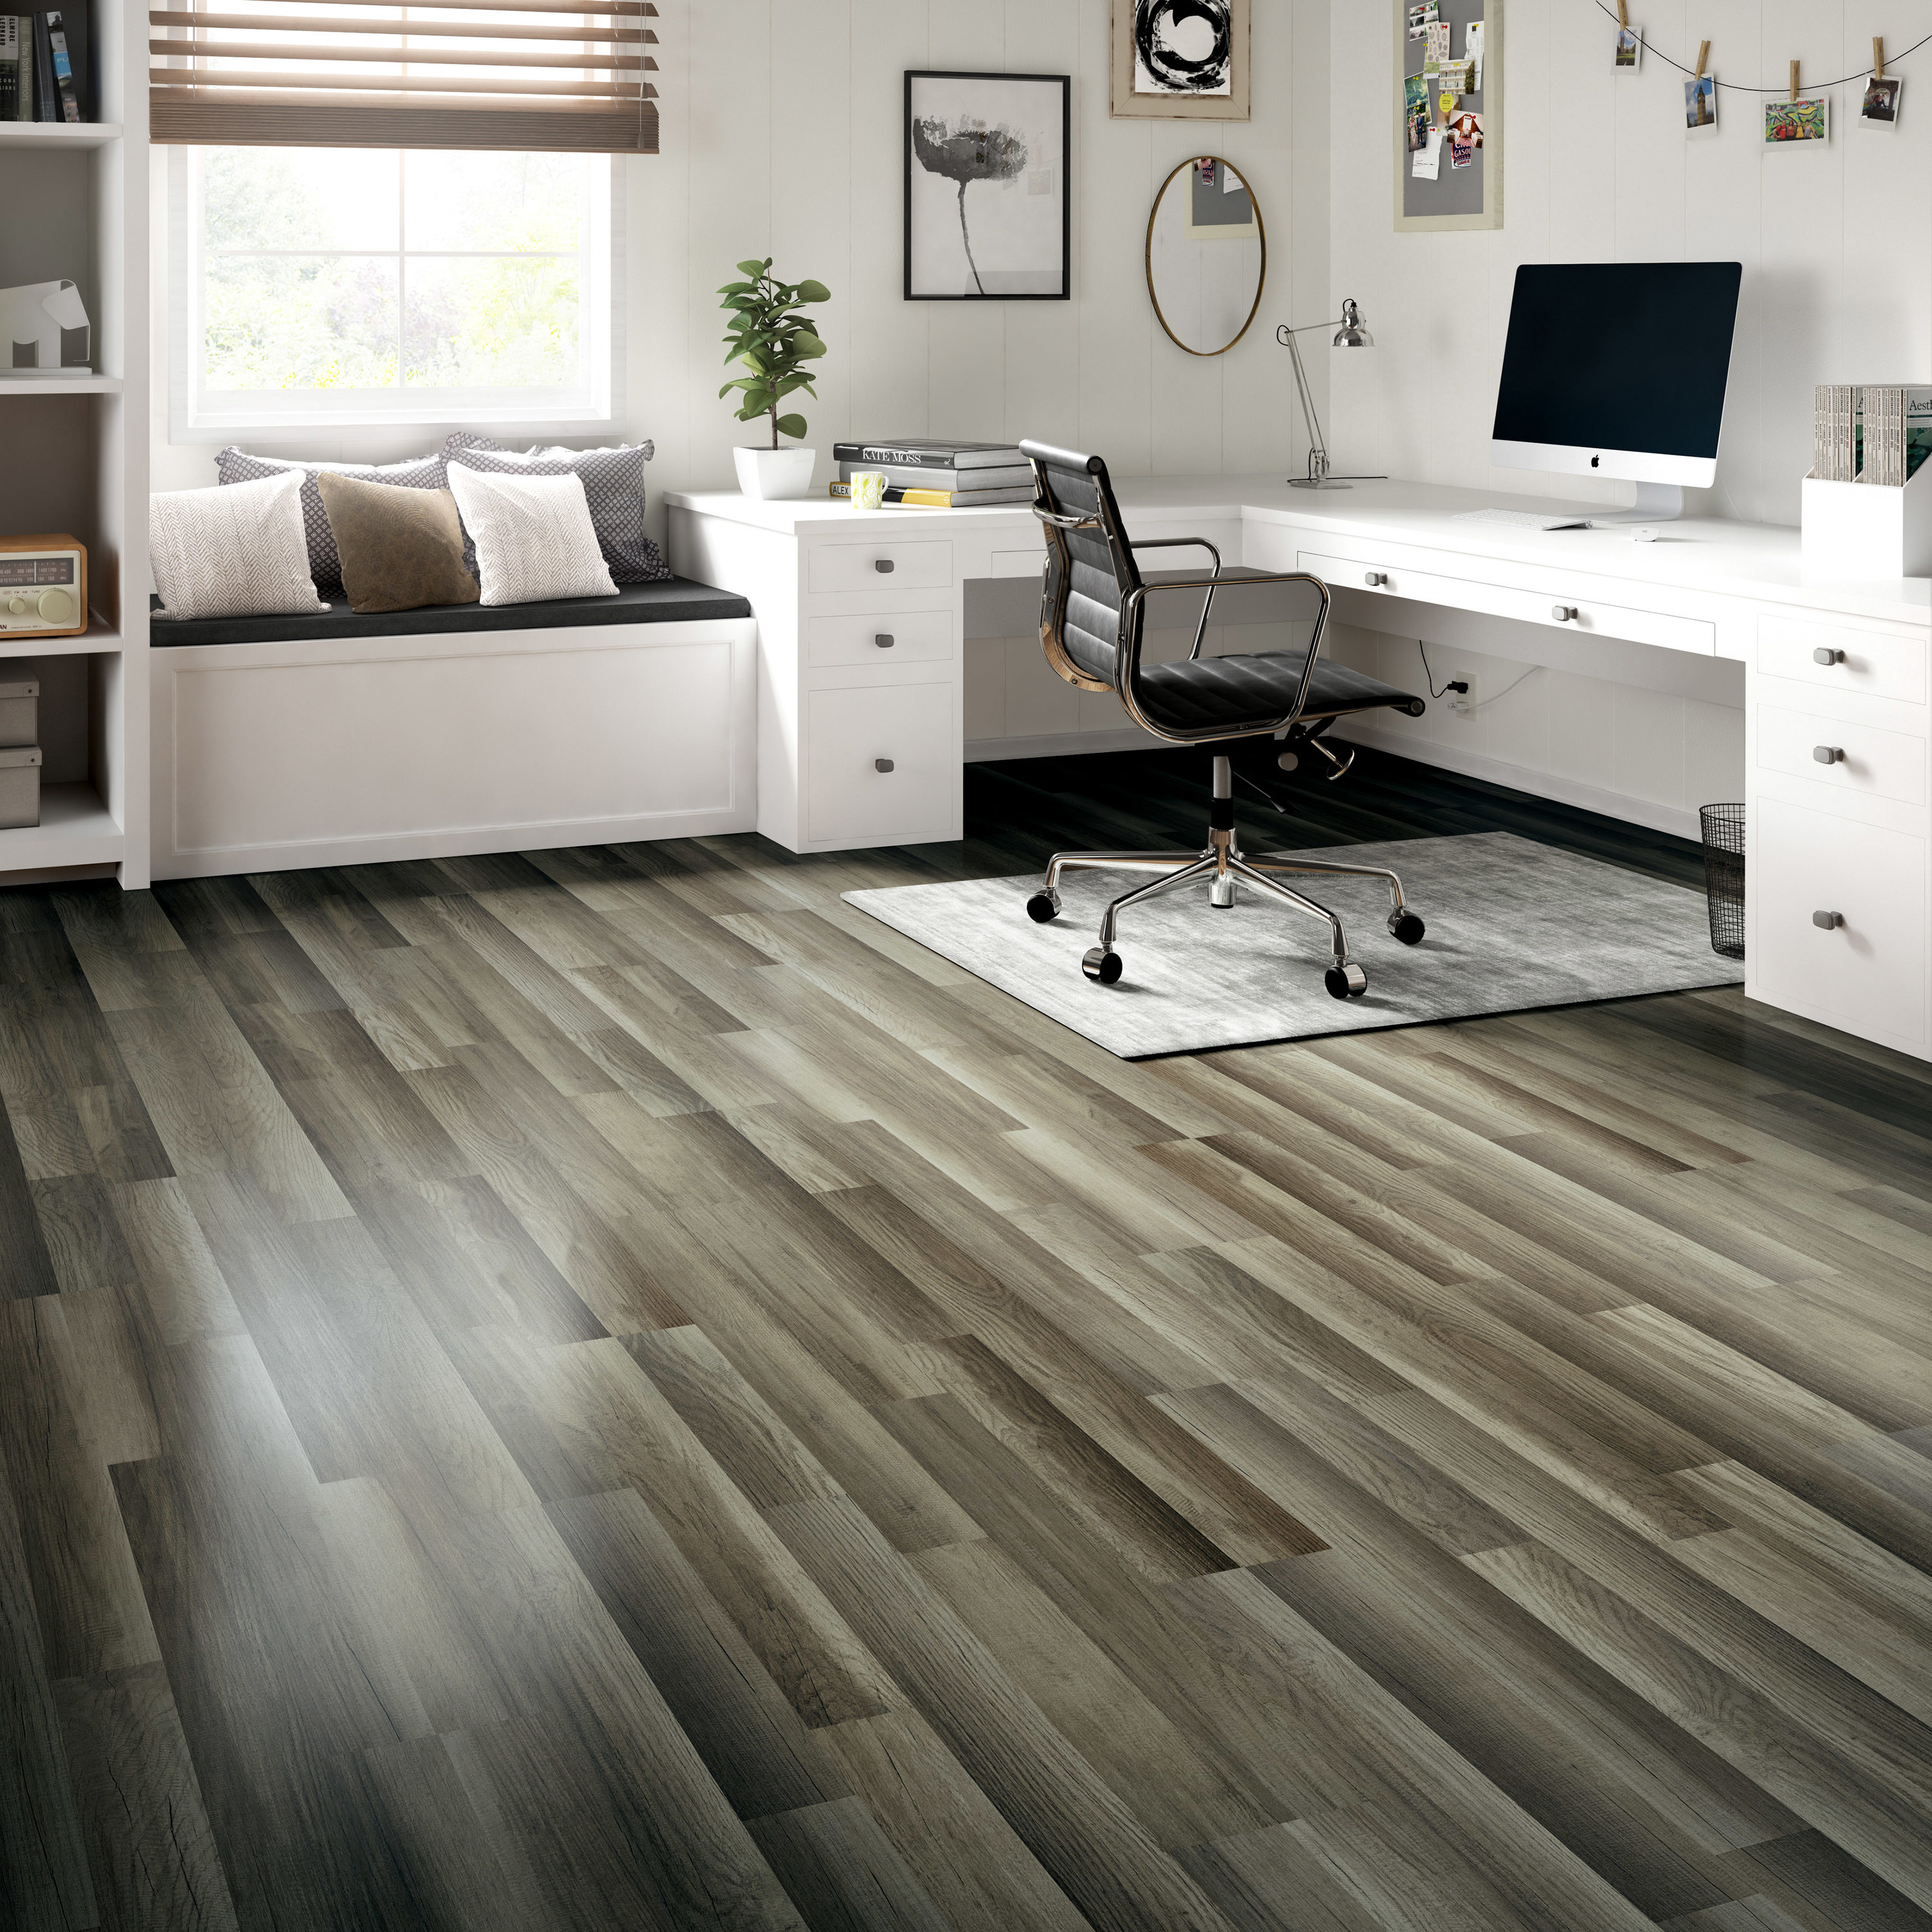 Style Selections Aged Gray Oak 8-mm Thick Wood Plank 7.59-in W x 50.7-in L  Laminate Flooring (21.44-sq ft) in the Laminate Flooring department at Lowes .com